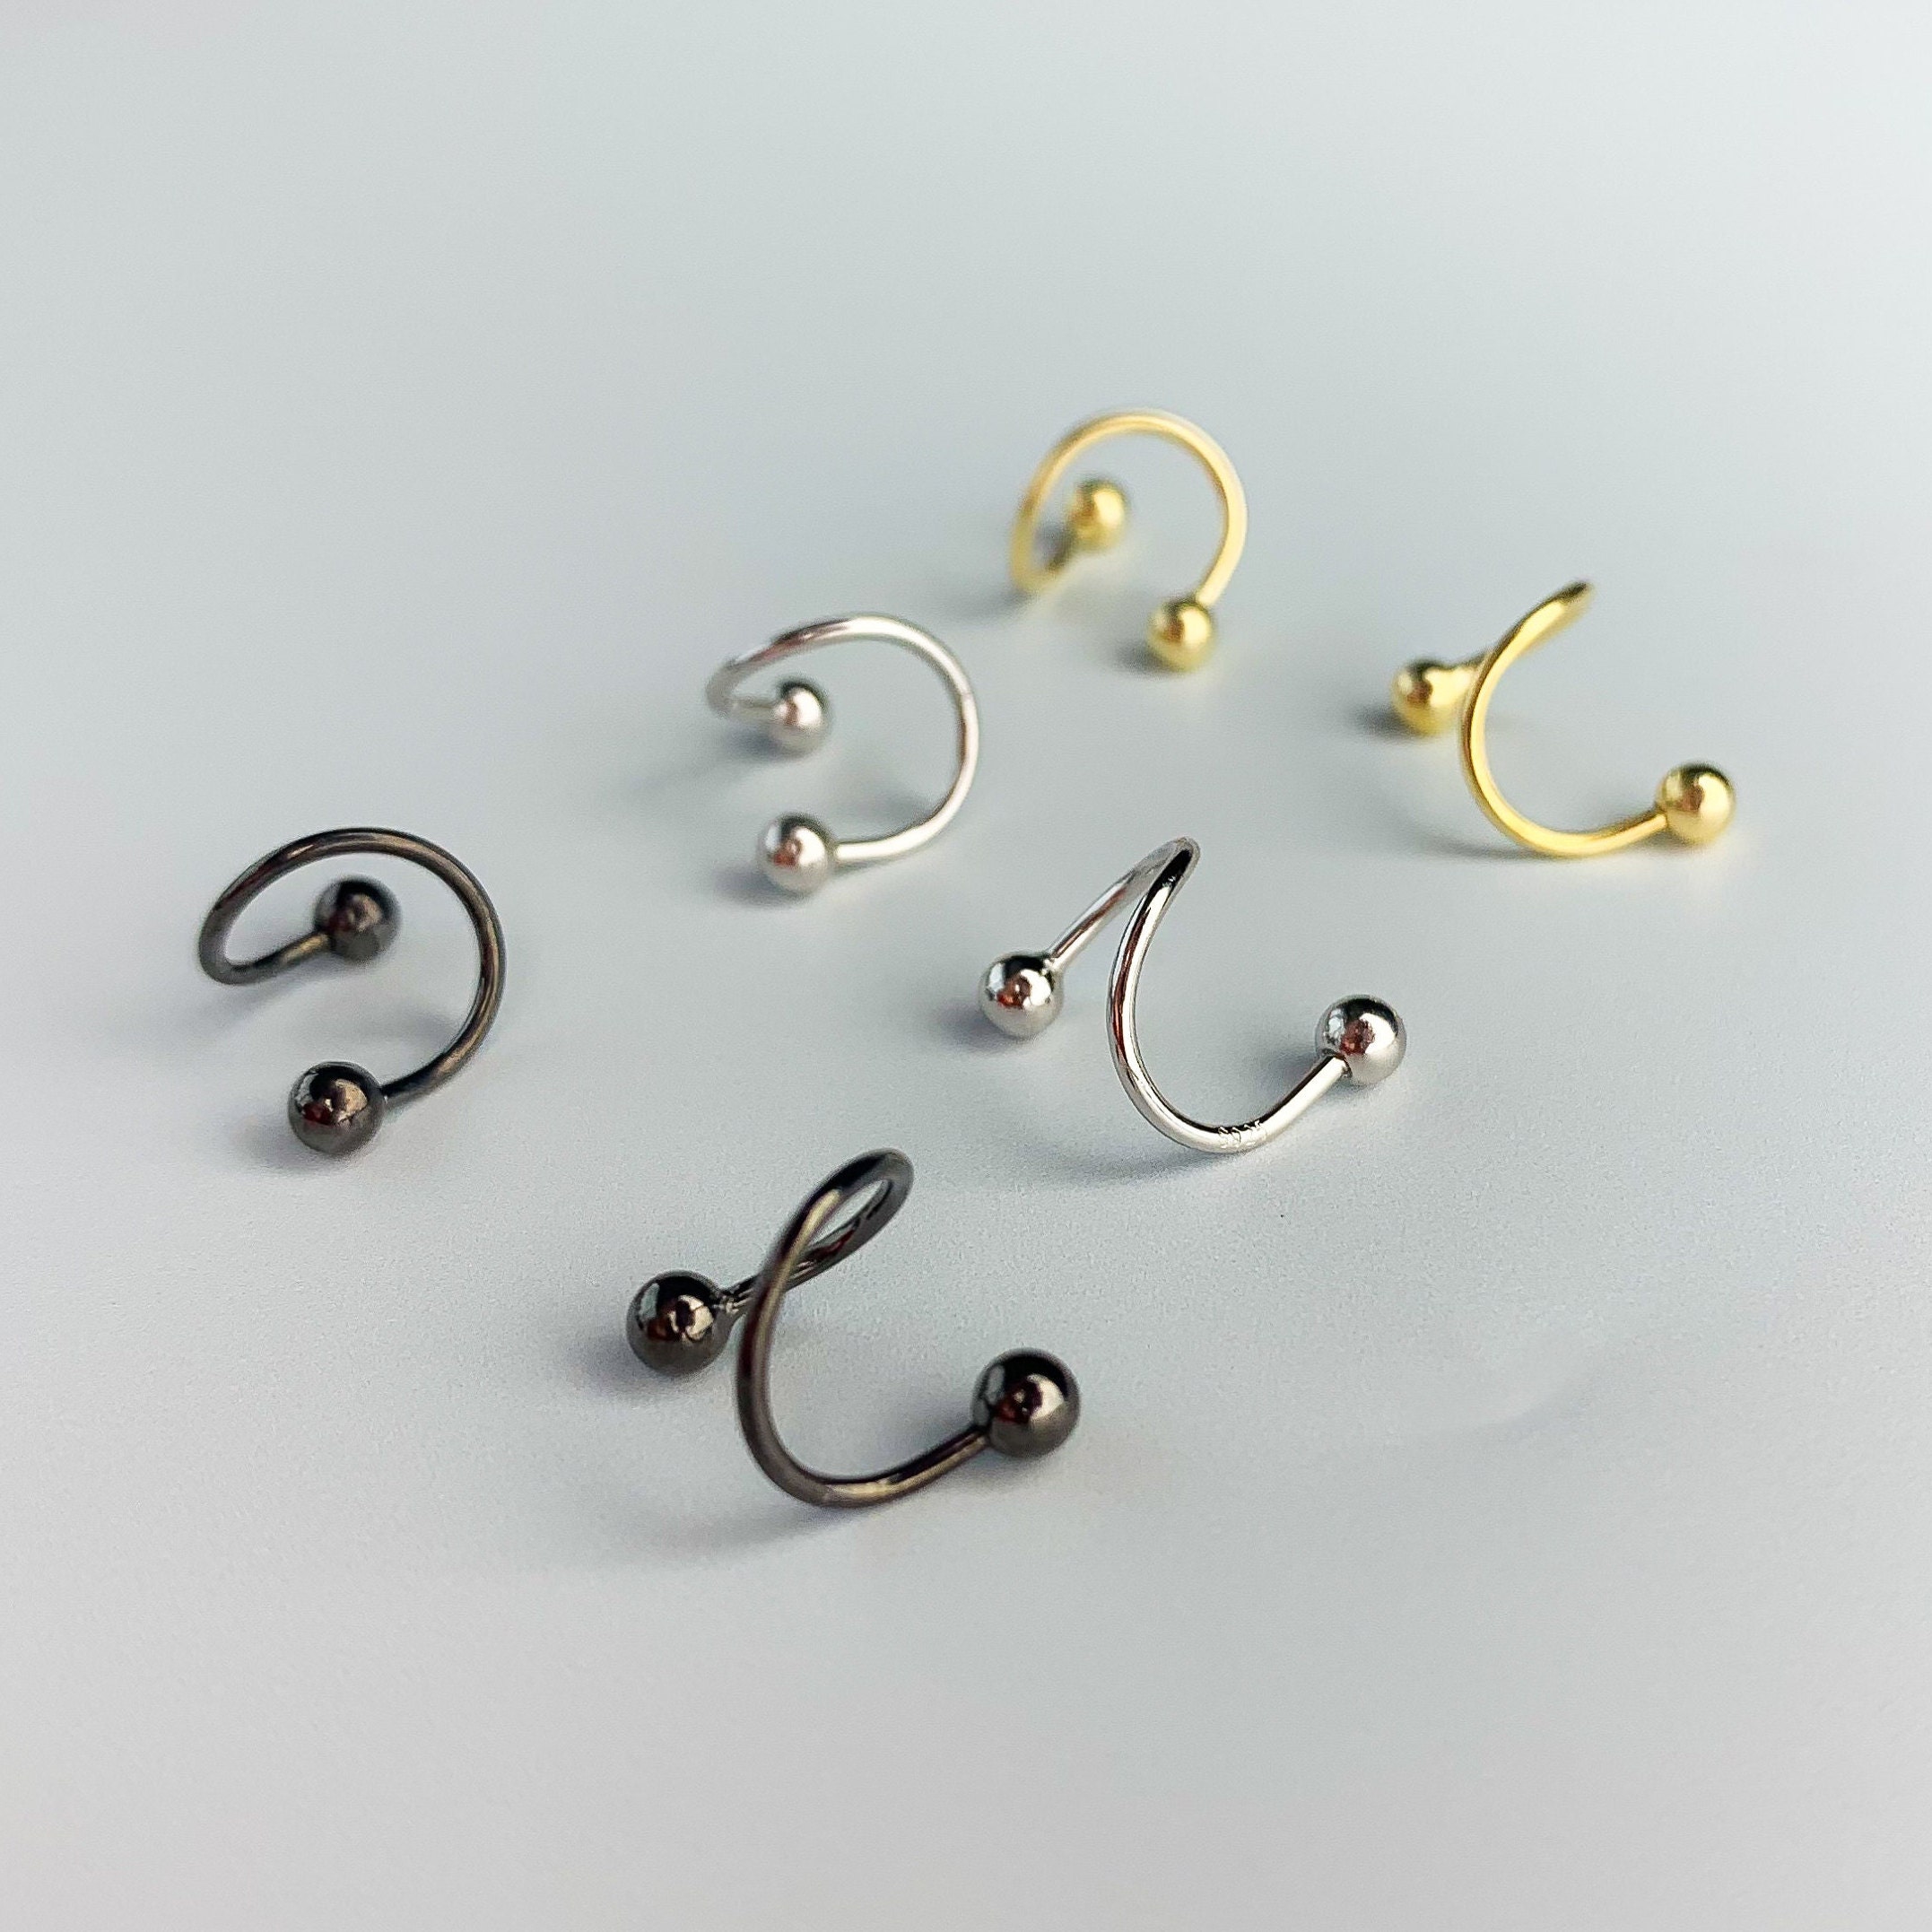 Silver Spiral Stud Earring 16g Silver Spiral Earring Delicate Circle Swirl Stud Geometric Earring Screw Back Earring M Size Large Size L Size - Circle